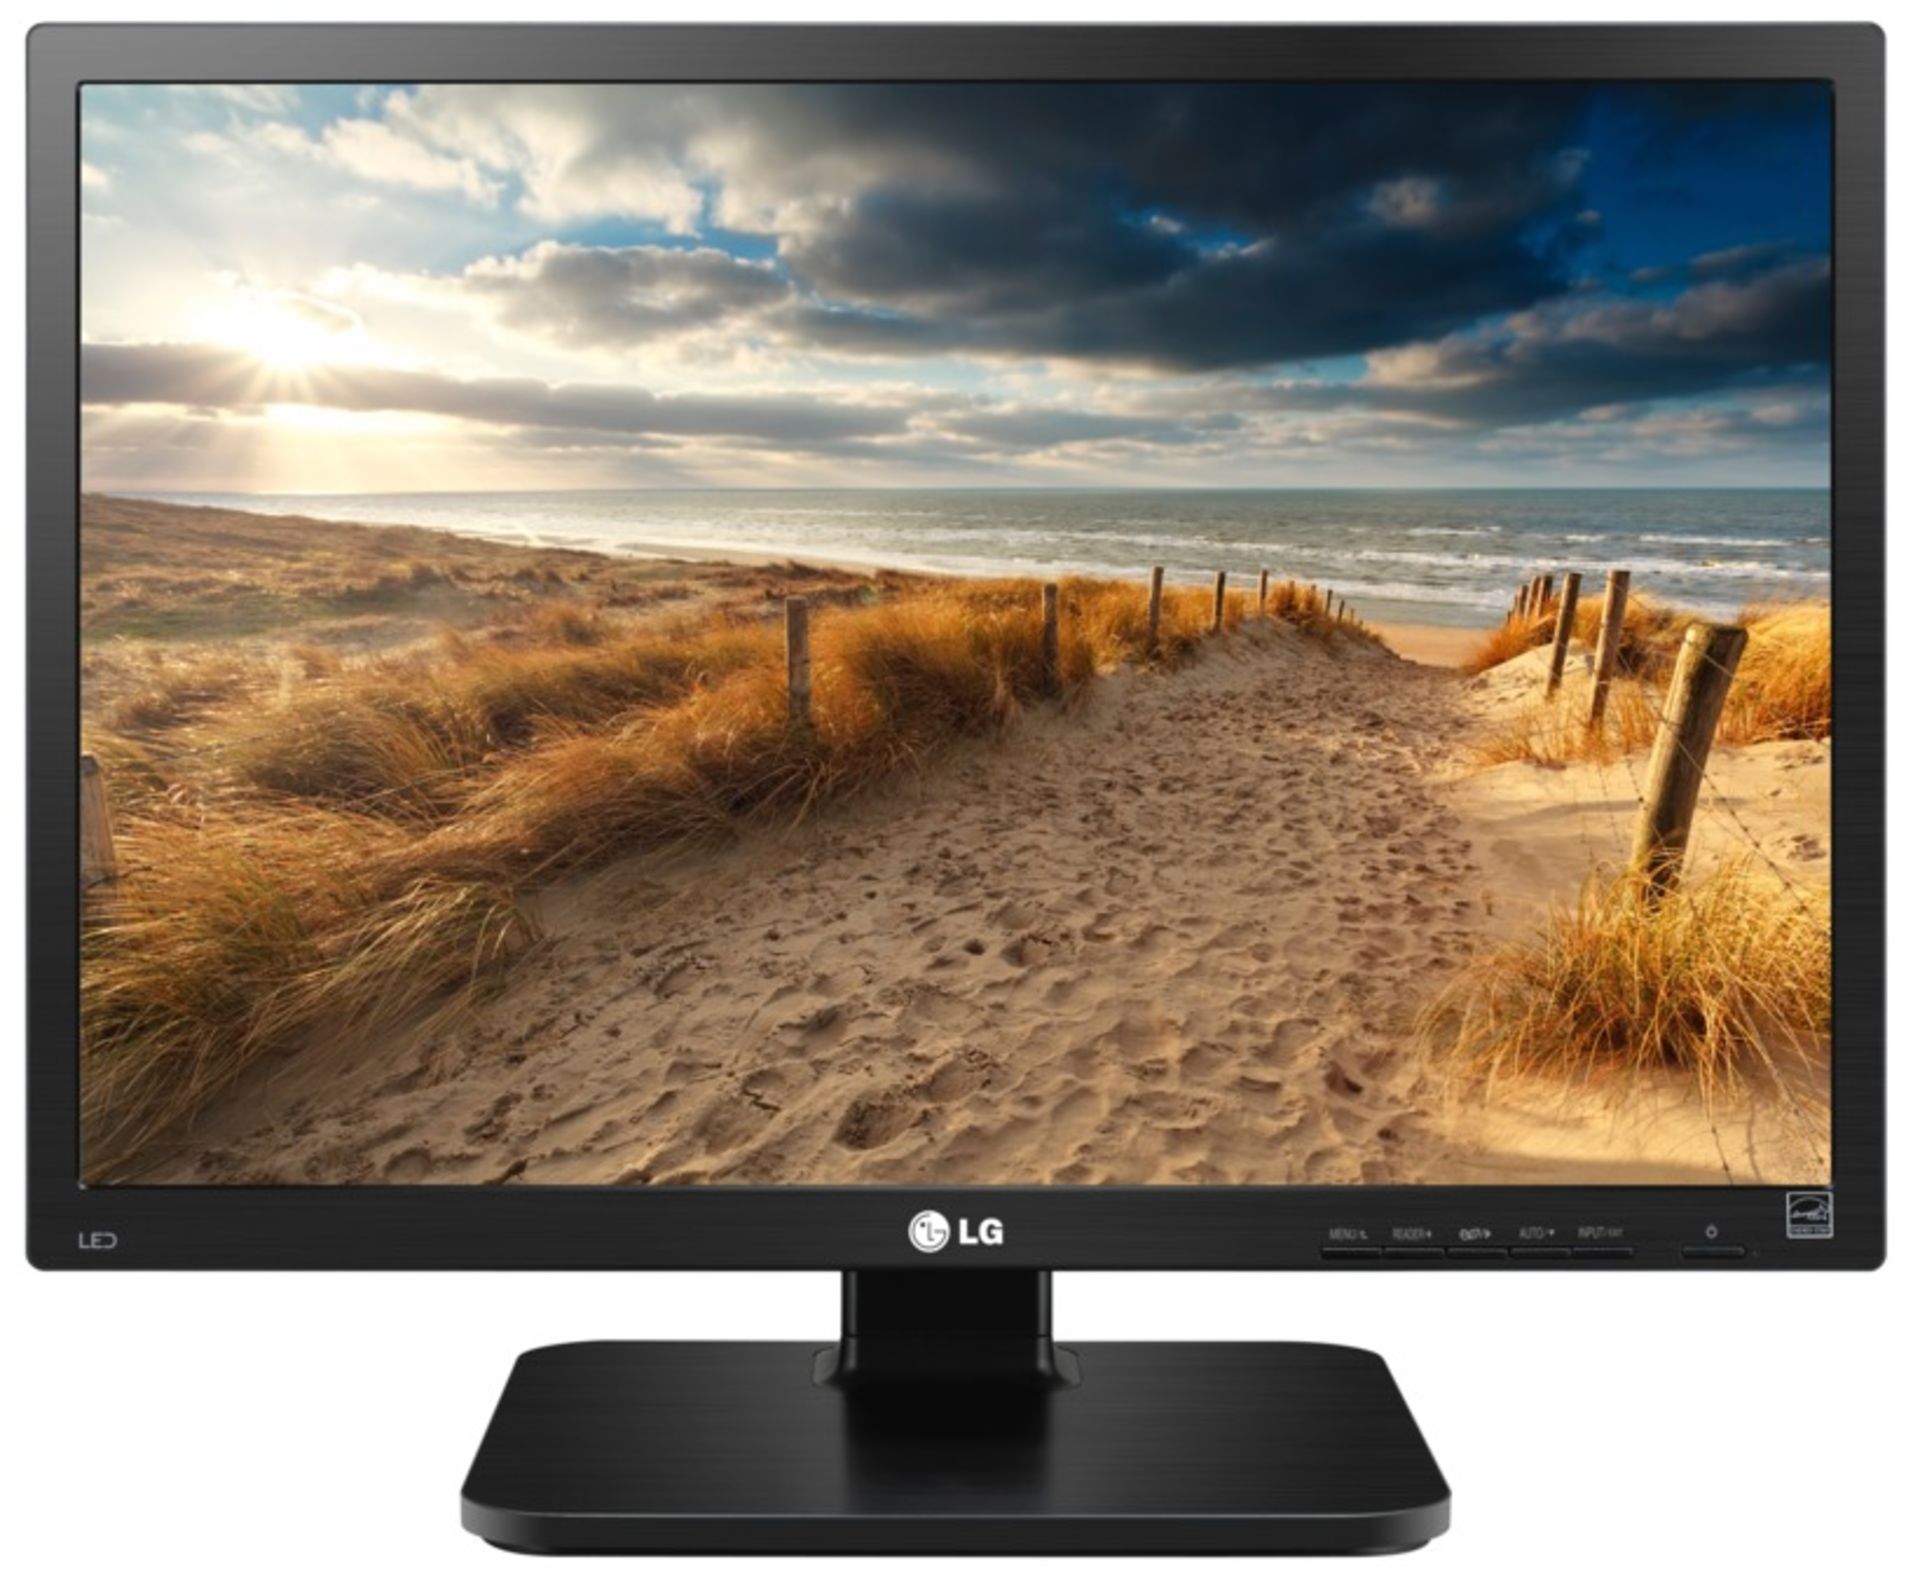 V Grade A LG 22 Inch FULL HD IPS LED MONITOR WITH SPEAKERS - D-SUB, DVI-D, HDMI, DISPLAY PORT